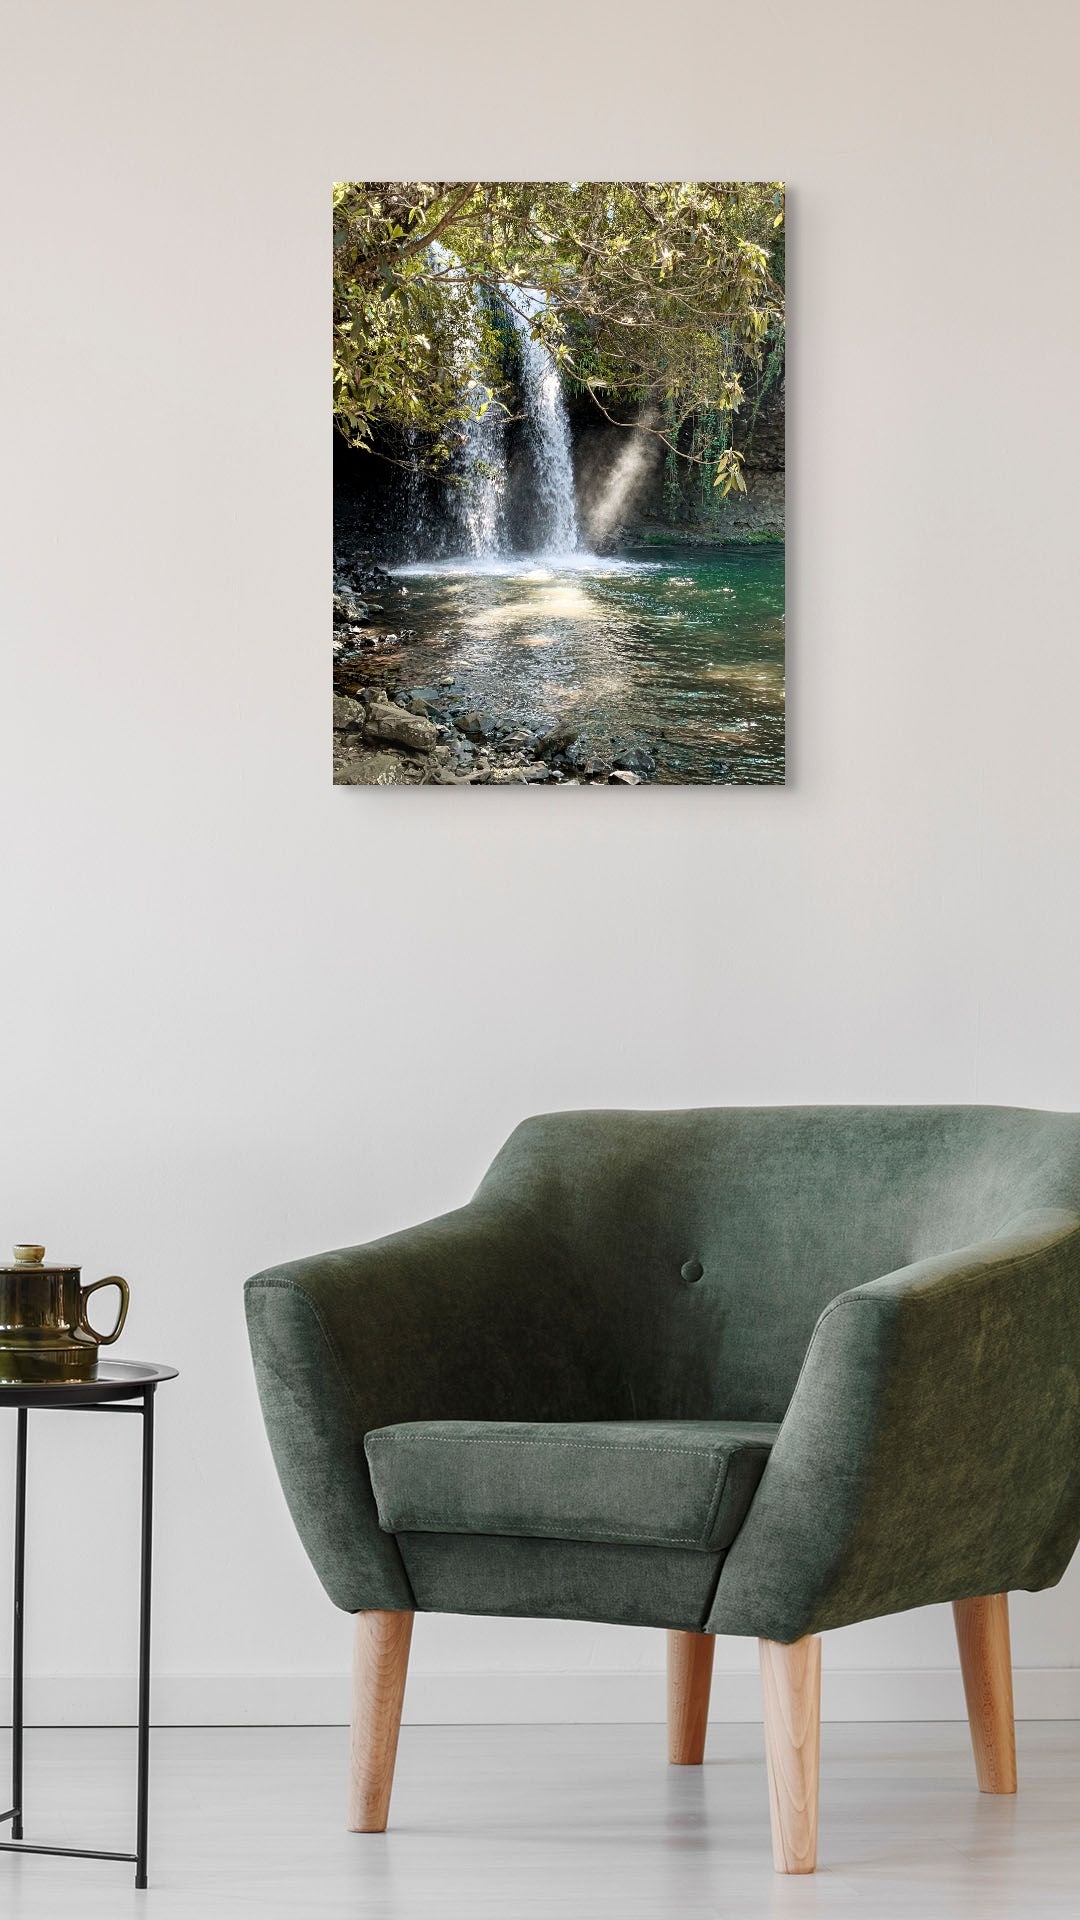 Rainforest Canvas Wall Art in office foyer with white wall, green chair, black side table and grey floorboards